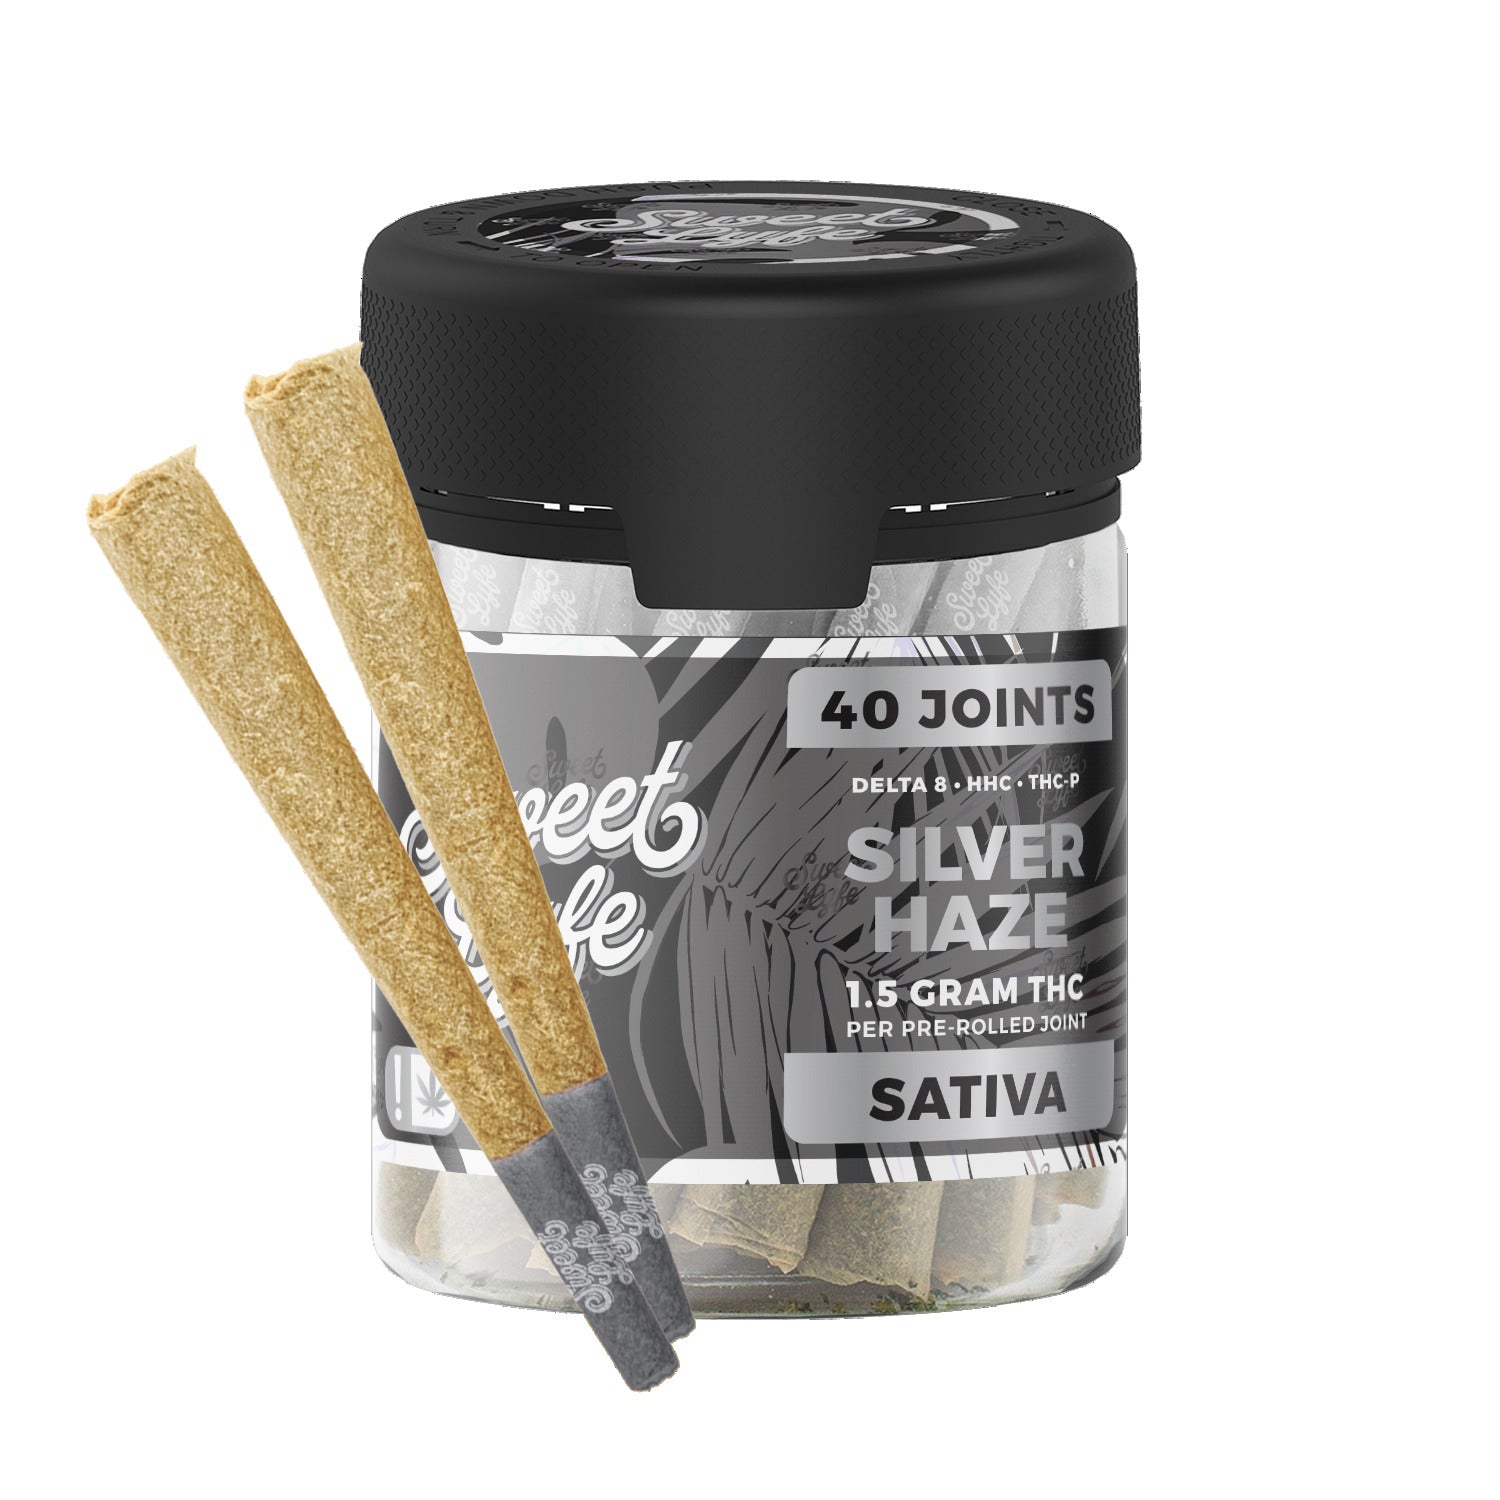 40 Pack of Joints D8+THCP  - 1.5g per Joint - Silver Haze - Sativa